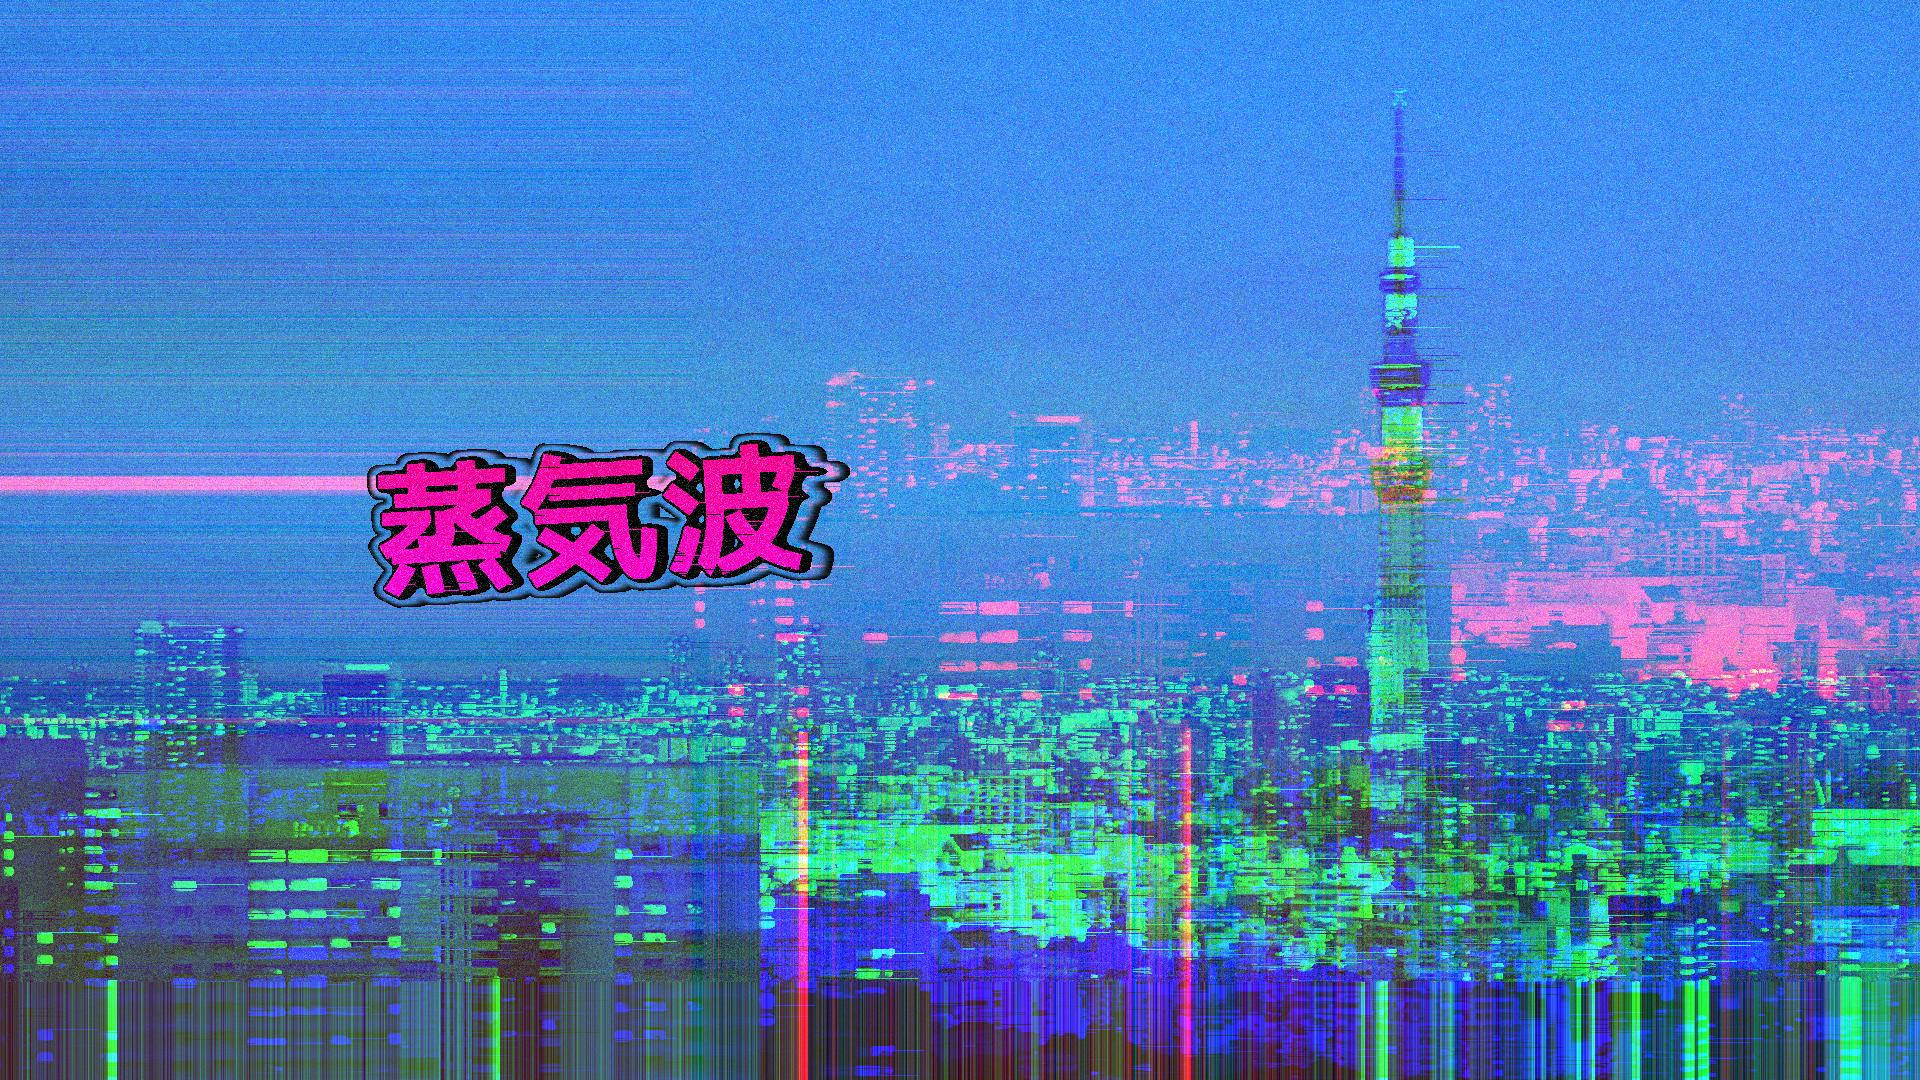 Discover the City's Aesthetic with Vaporwave Wallpaper